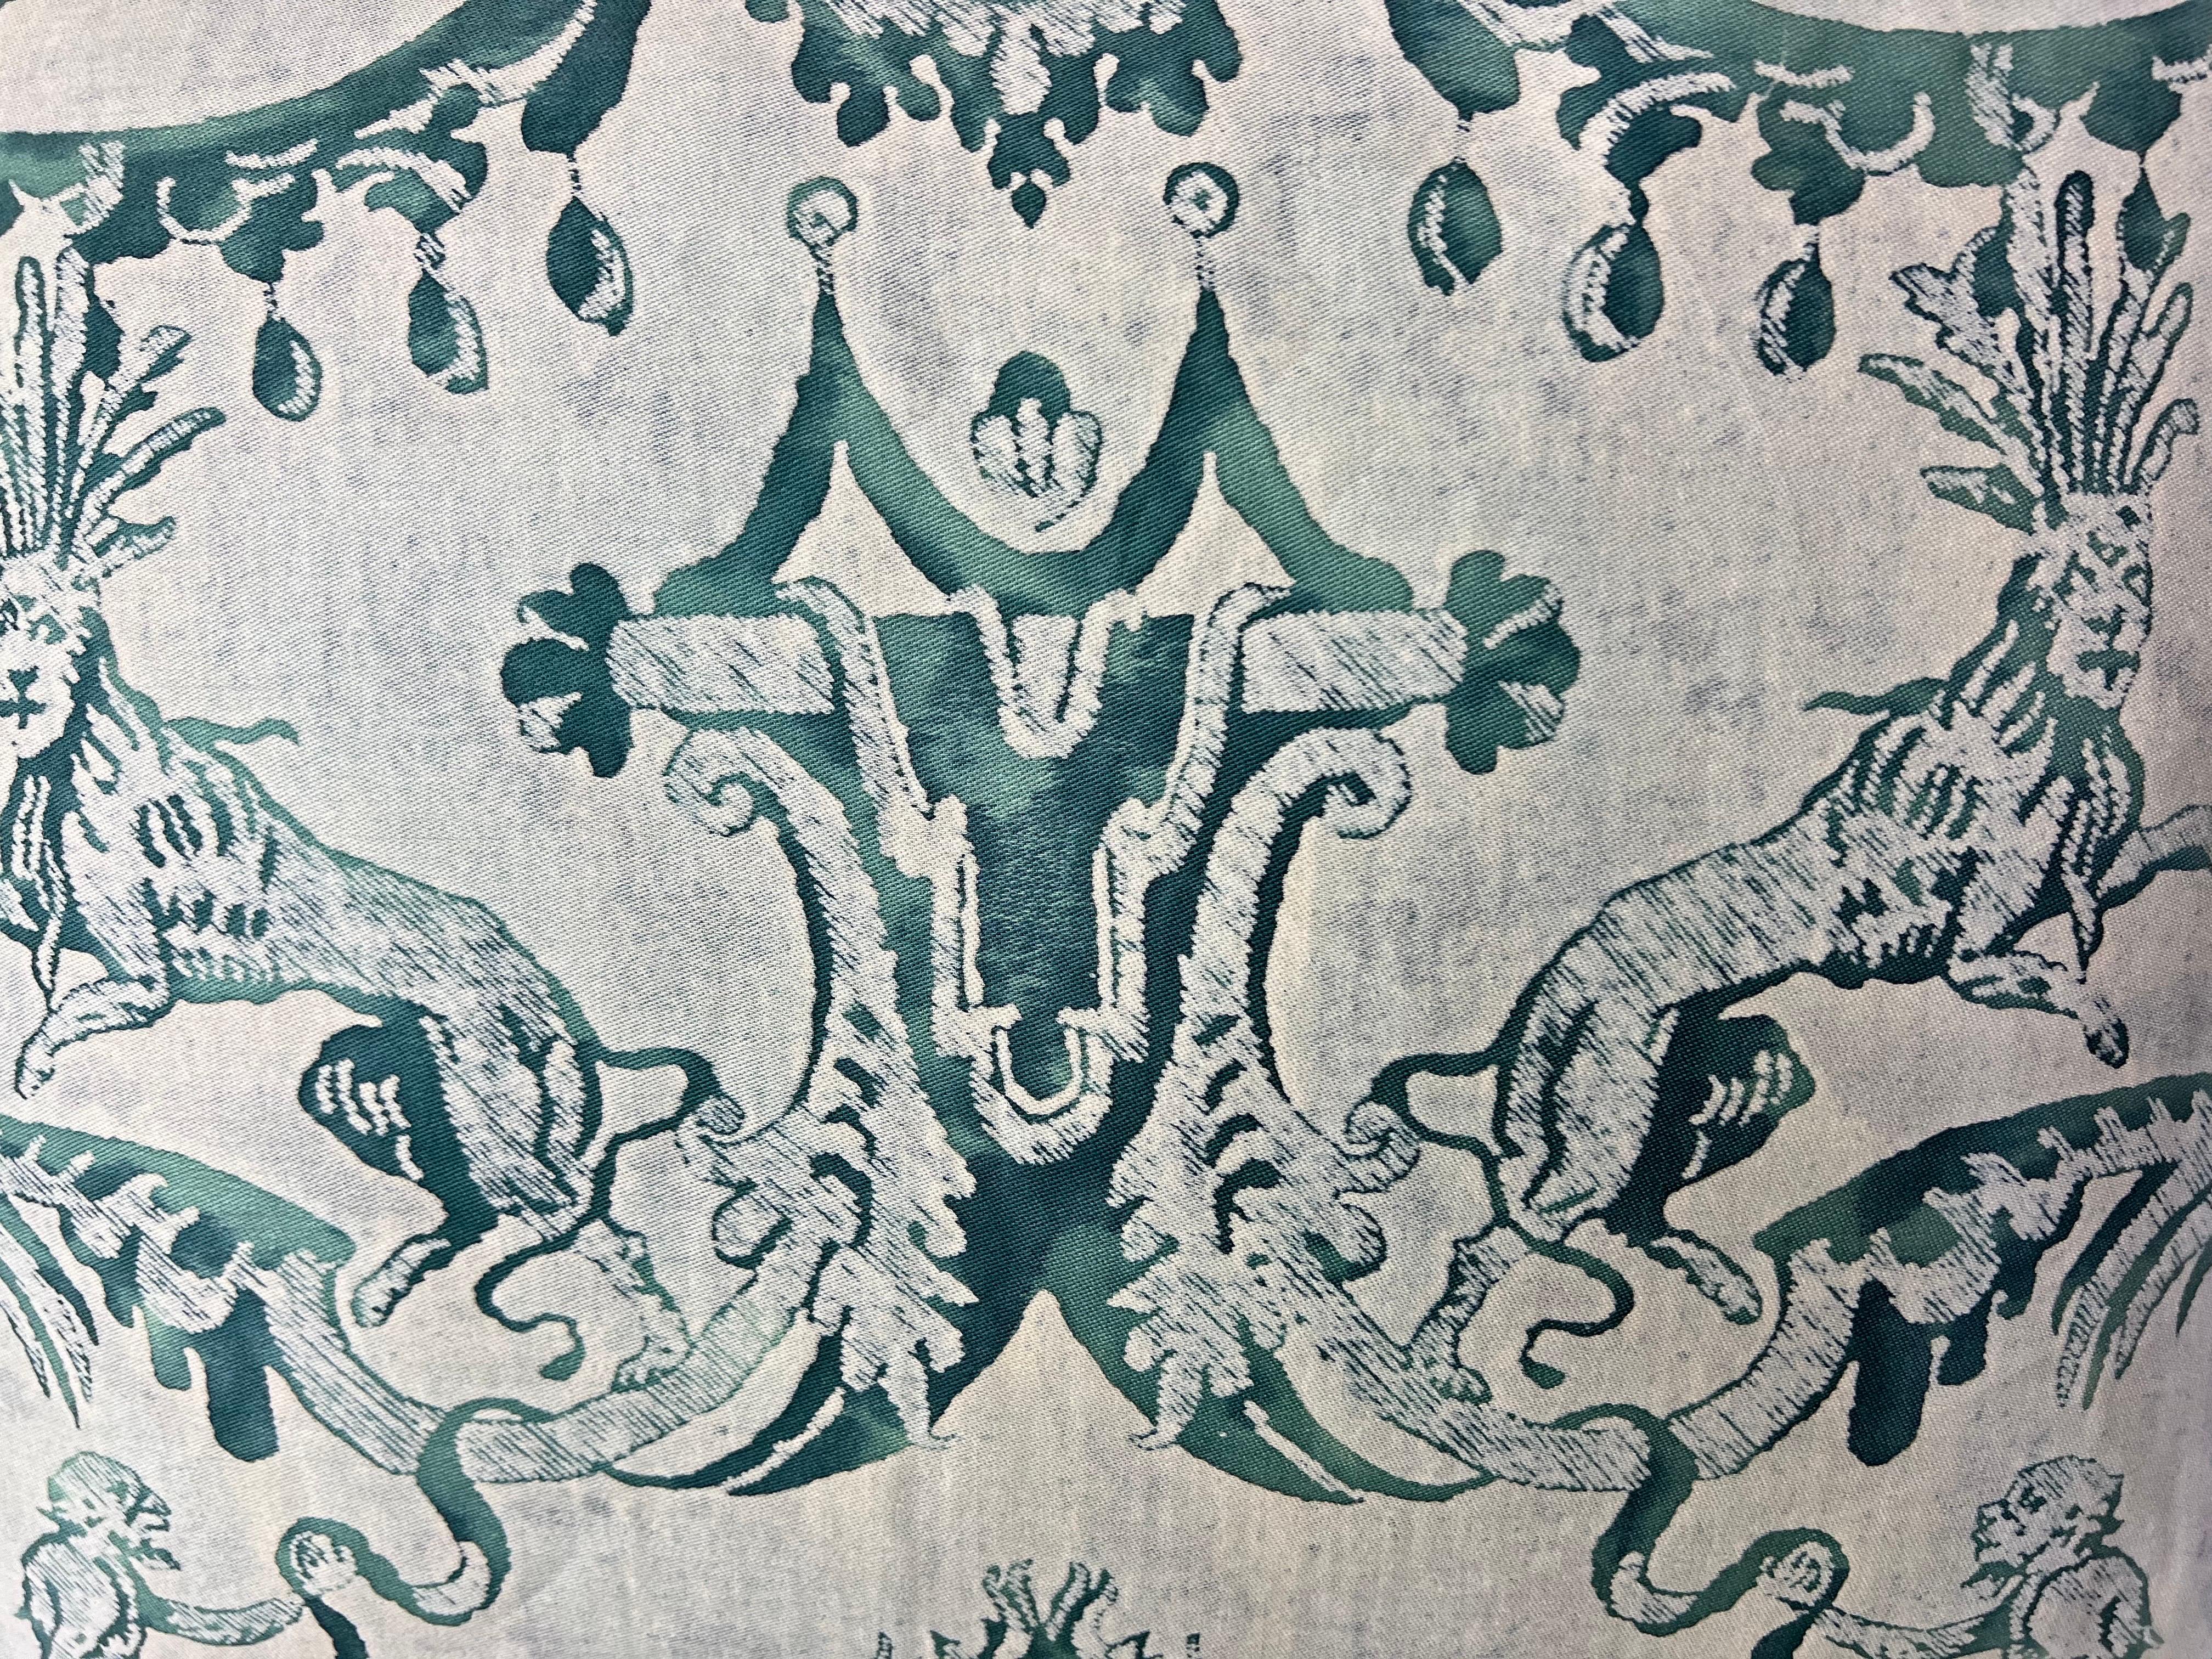 Pair of vibrant teal & white colored Marzianno patterned Fortuny textile pillows.  They depict Venetian lions and monkeys with garlands, acanthus leaves, and intricate details throughout.  They are backed with a rich colored teal velvet and finished